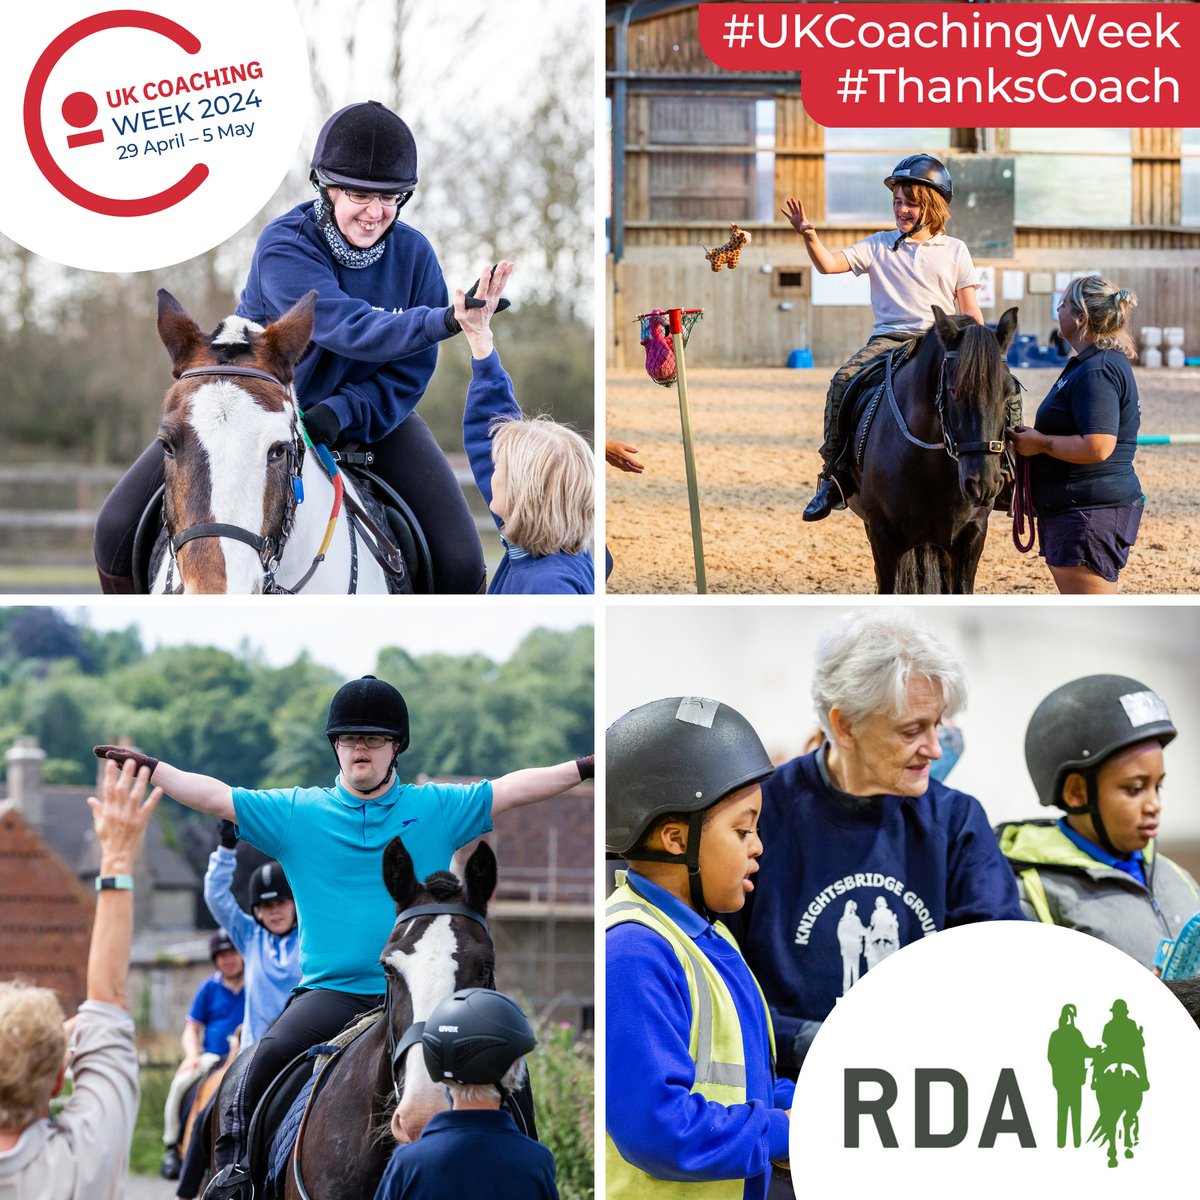 This UK Coaching Week, we want to shine a spotlight on our fantastic RDA Coaches, who are essential to our life-changing work. We want to hear from YOU, all about your favourite RDA coach or coaching experience, tell us in the replies 👇 #ThanksCoach #UKCoachingWeek